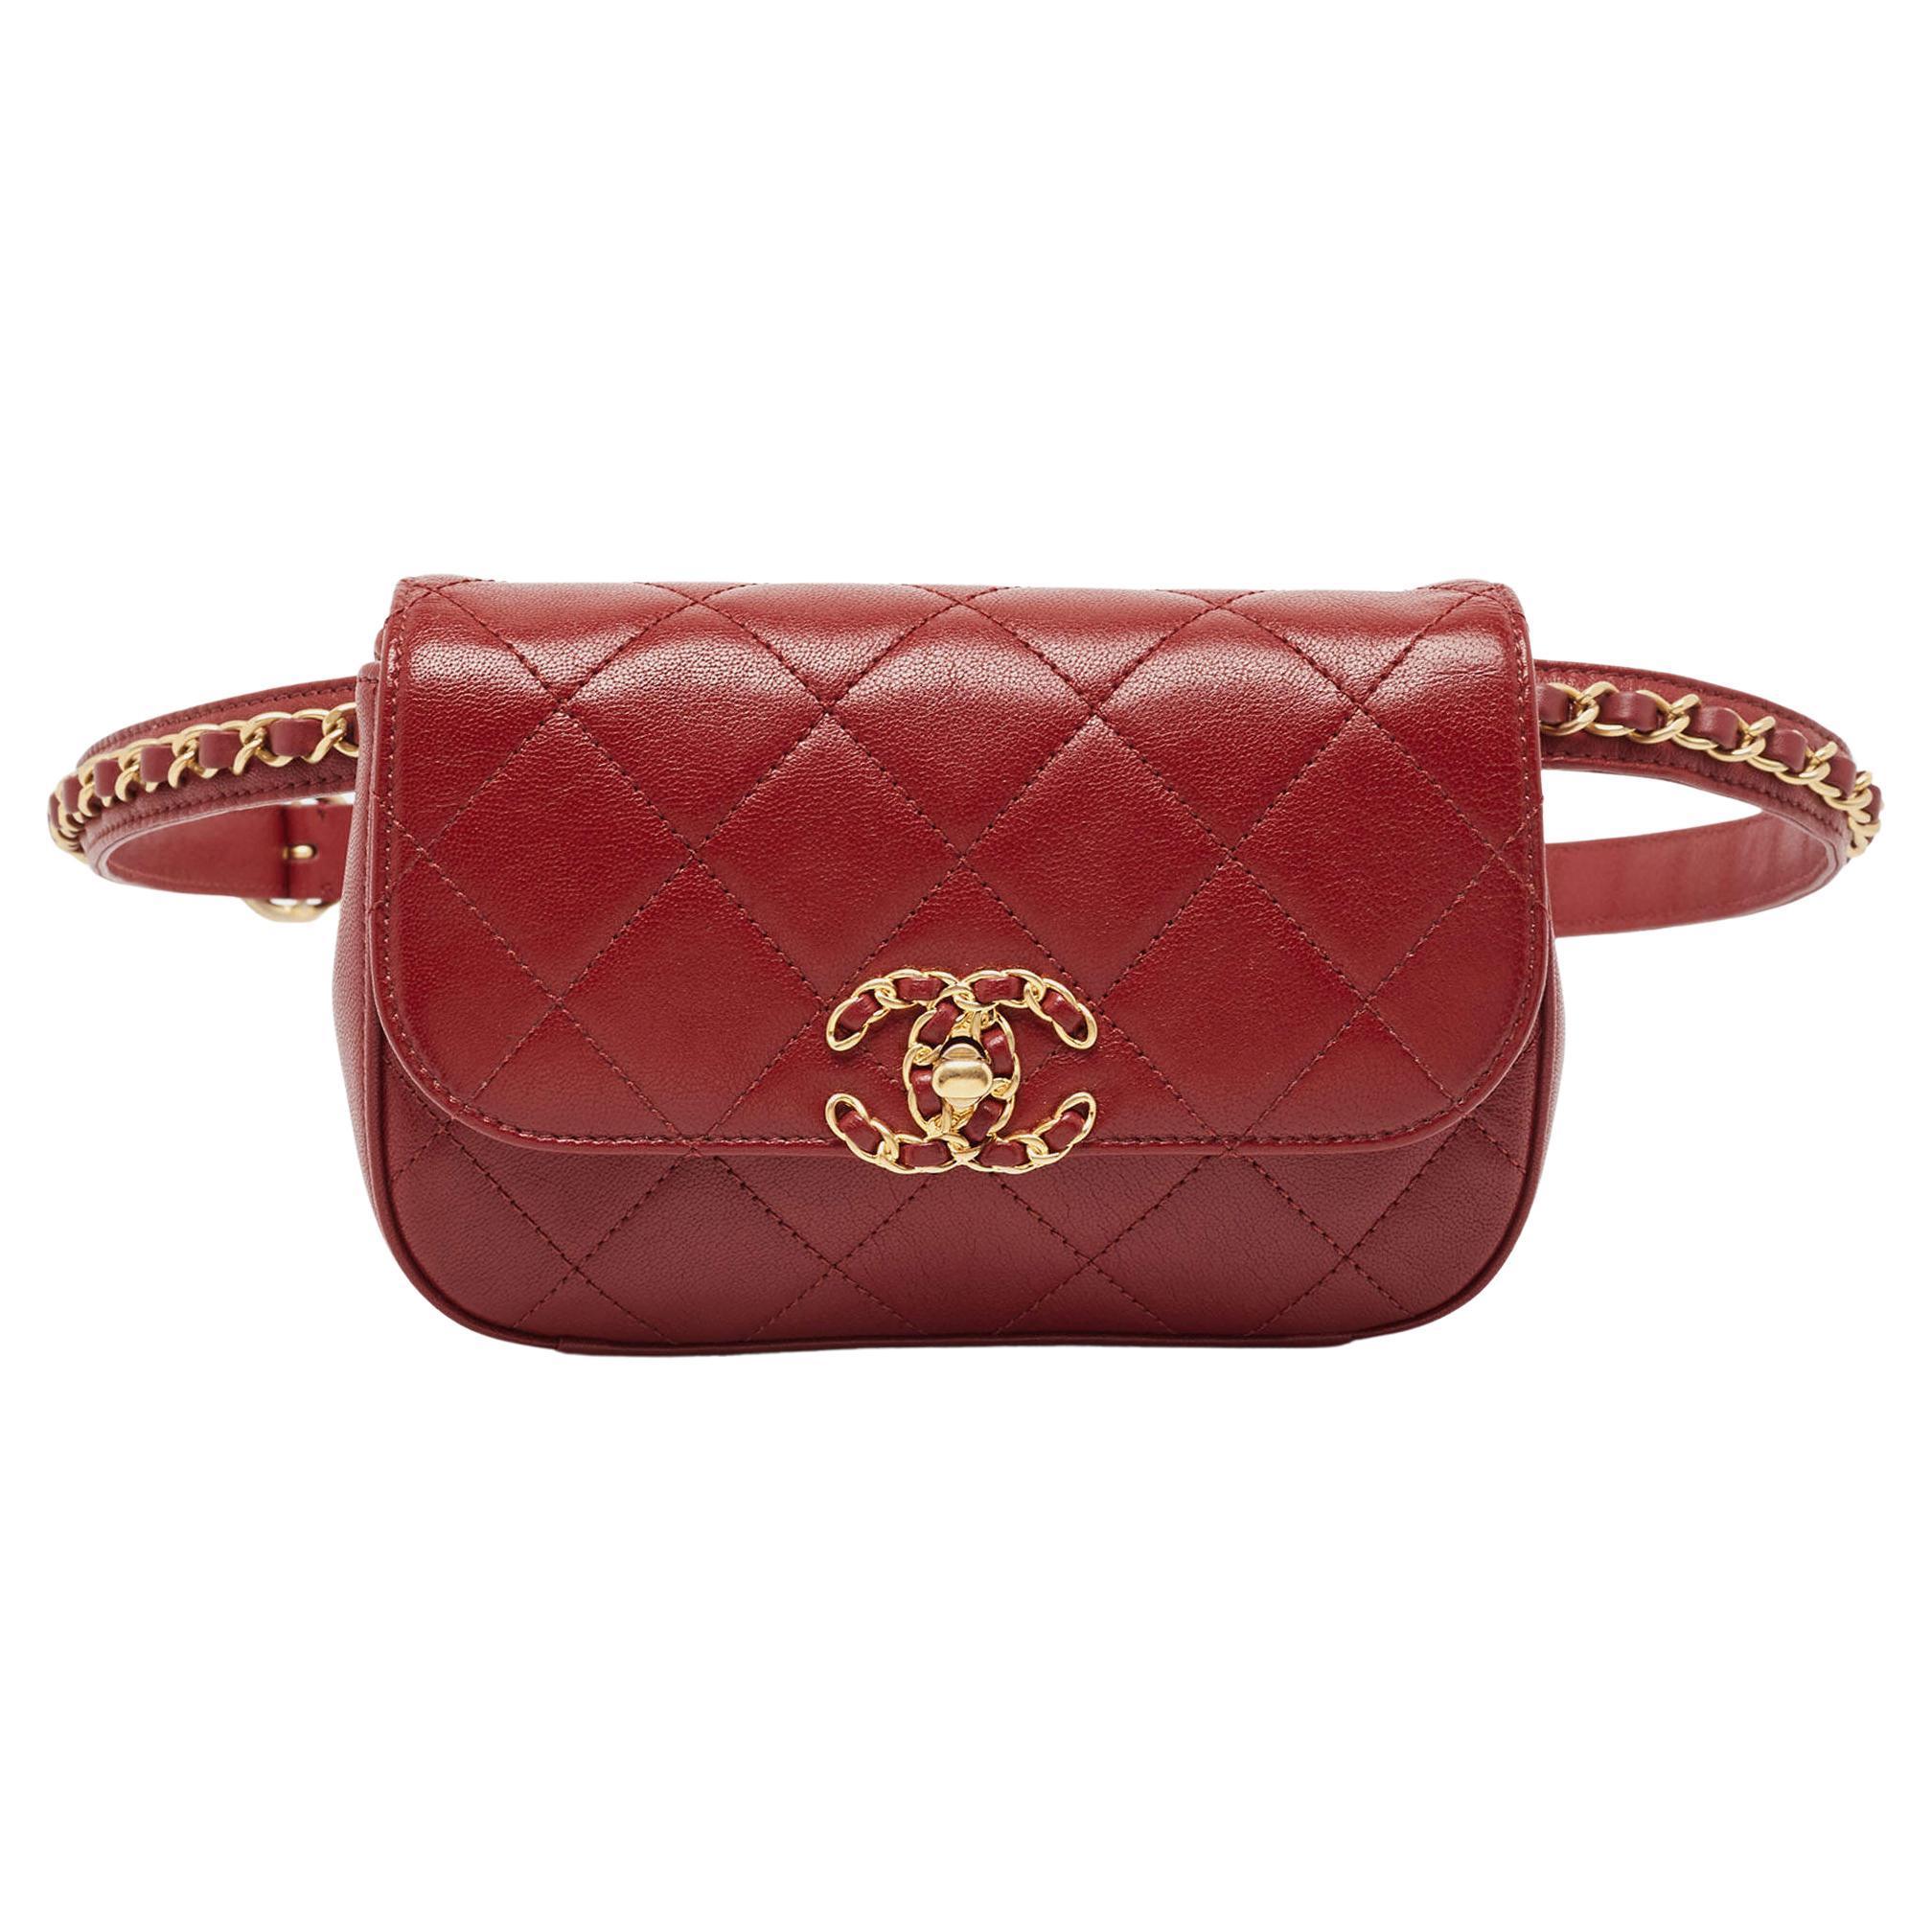 Chanel Dark Red Quilted Leather CC Flap Belt Bag For Sale